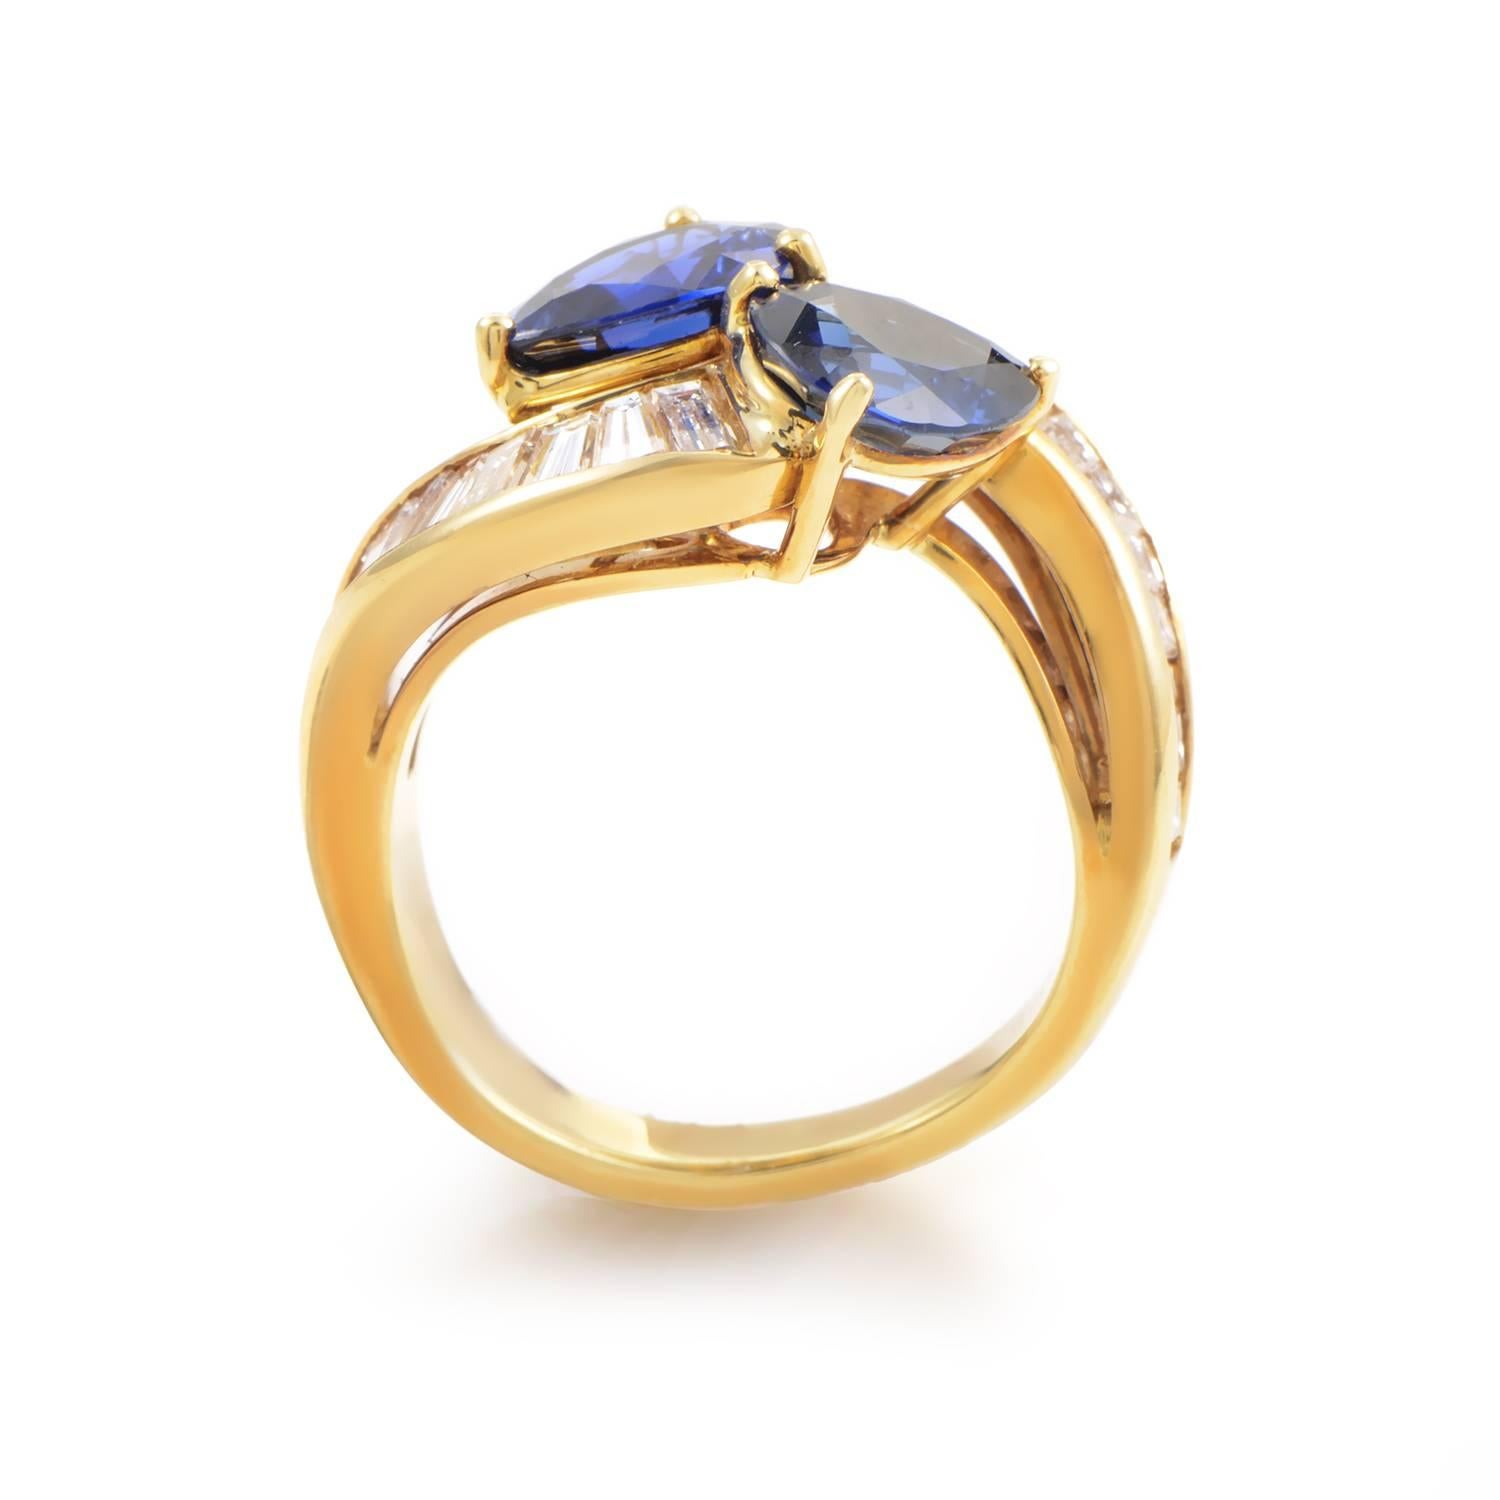 A gorgeous design from Graff enchants with the duet of sparkling stones. 18K yellow gold rises with fluid rhythm, it dual reach entwining with intimacy like dancers in a heated tango. The supple spine of each dancer is comprised of 1.50ct of